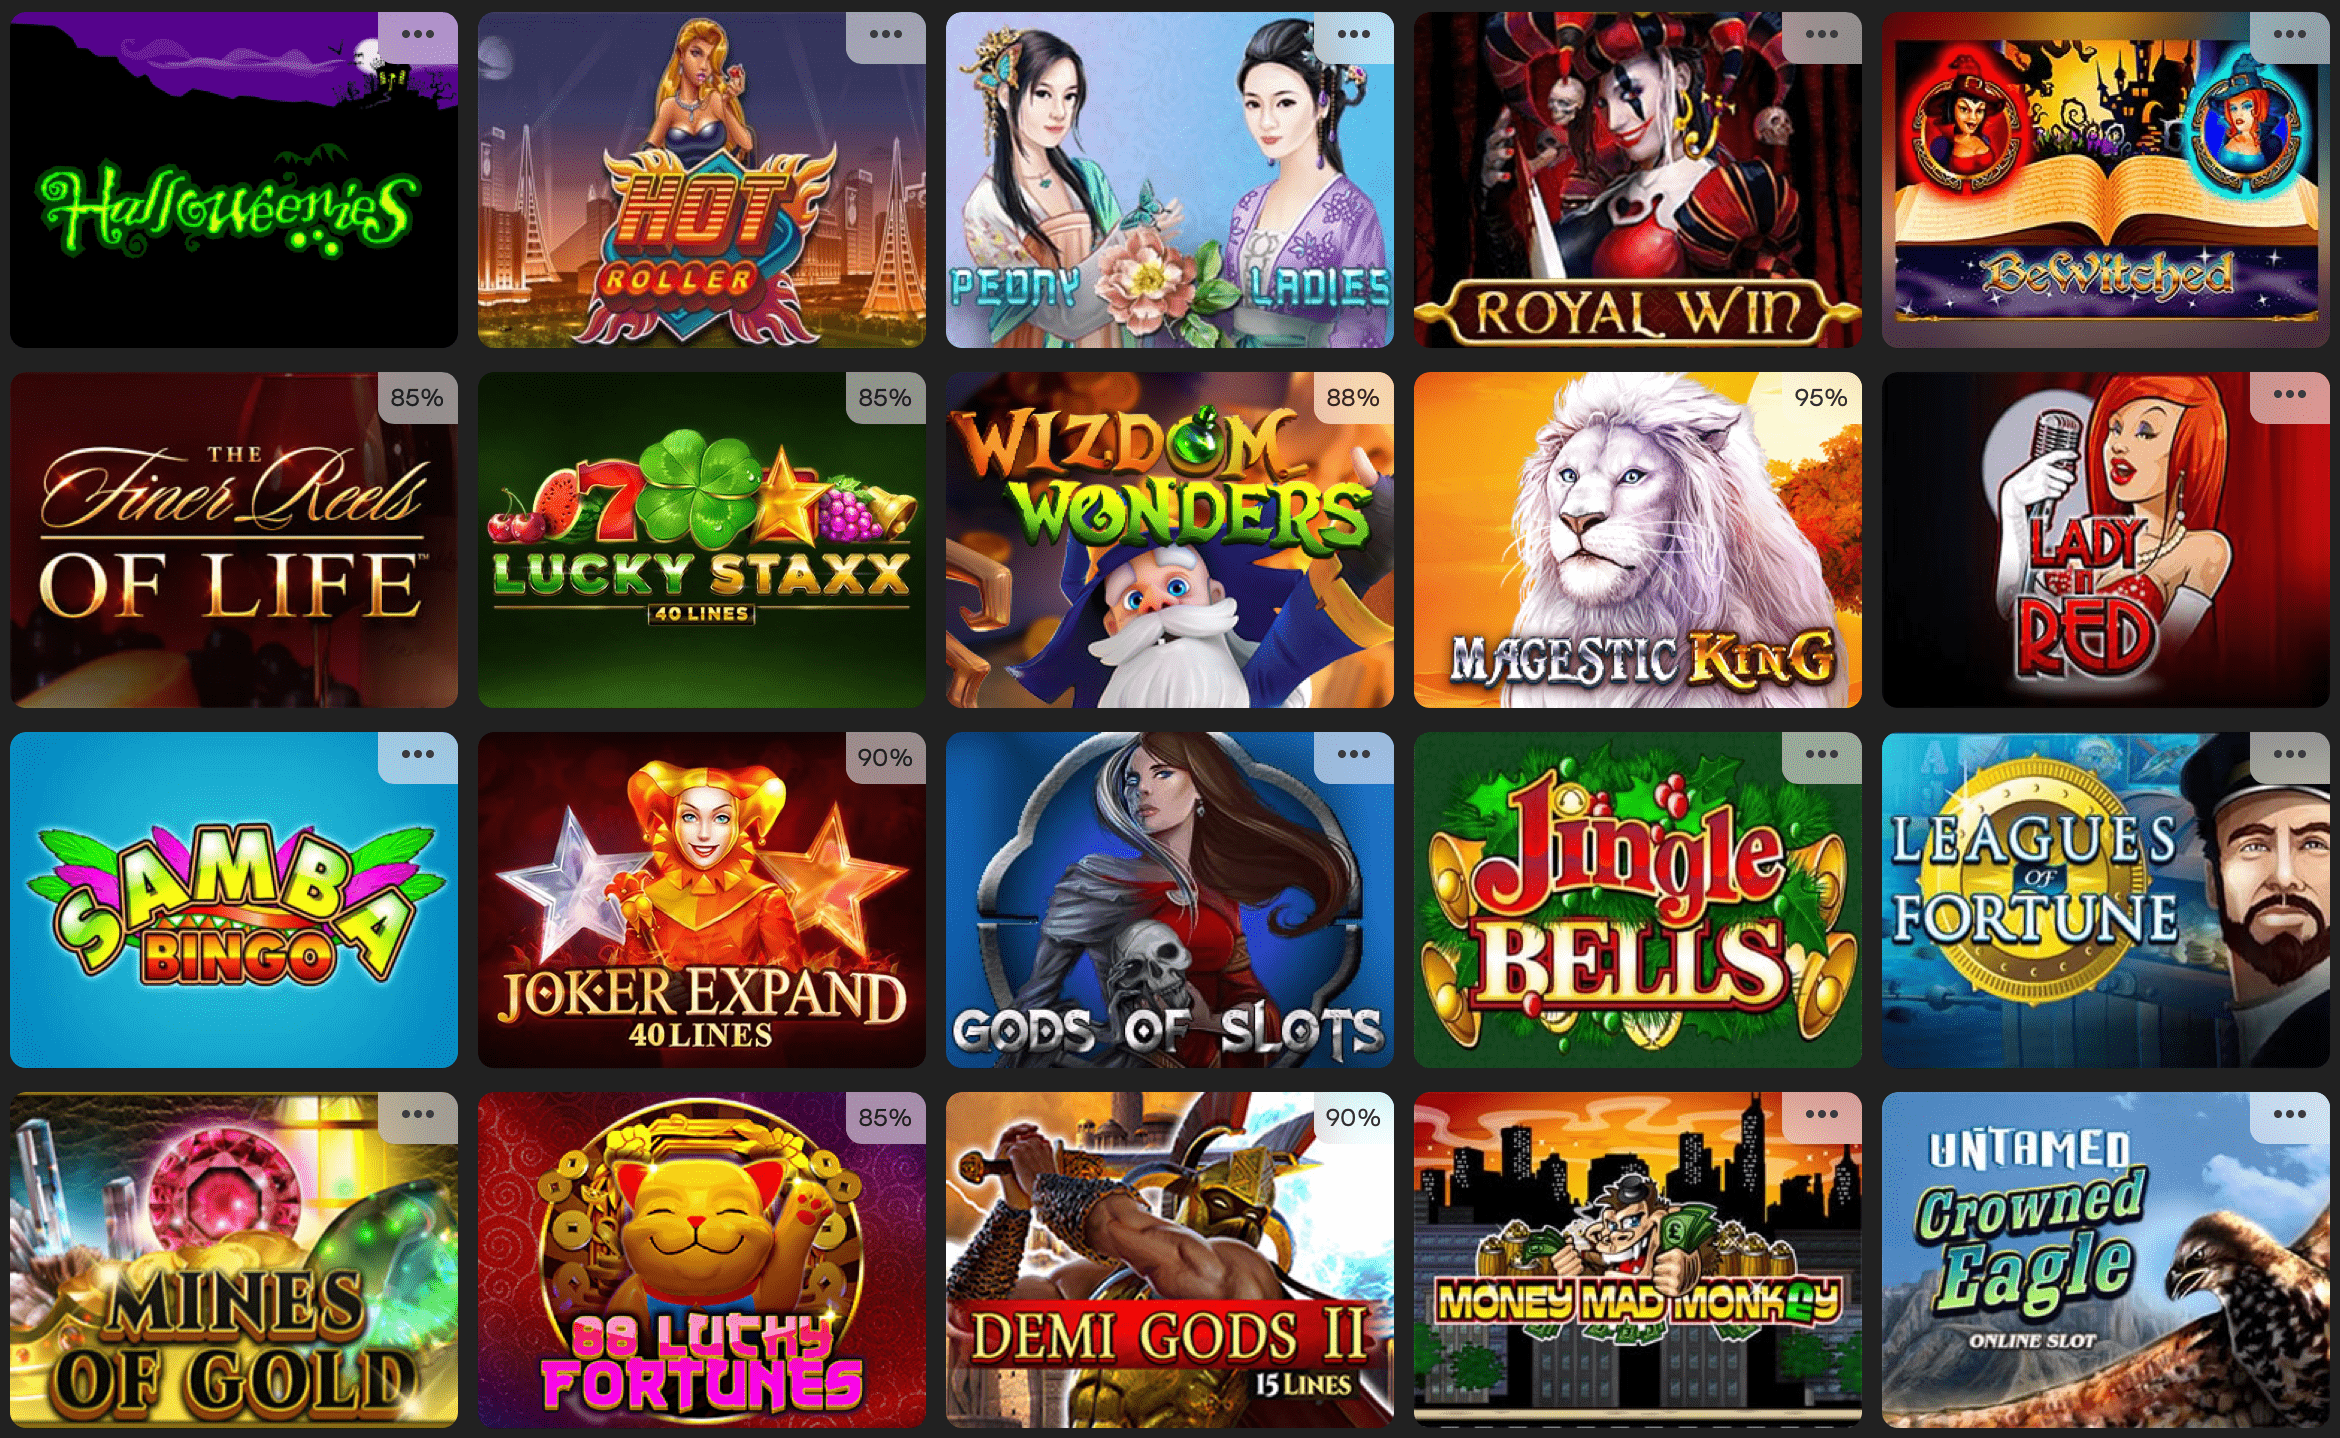 Slot machines and slots in Fairspin casino